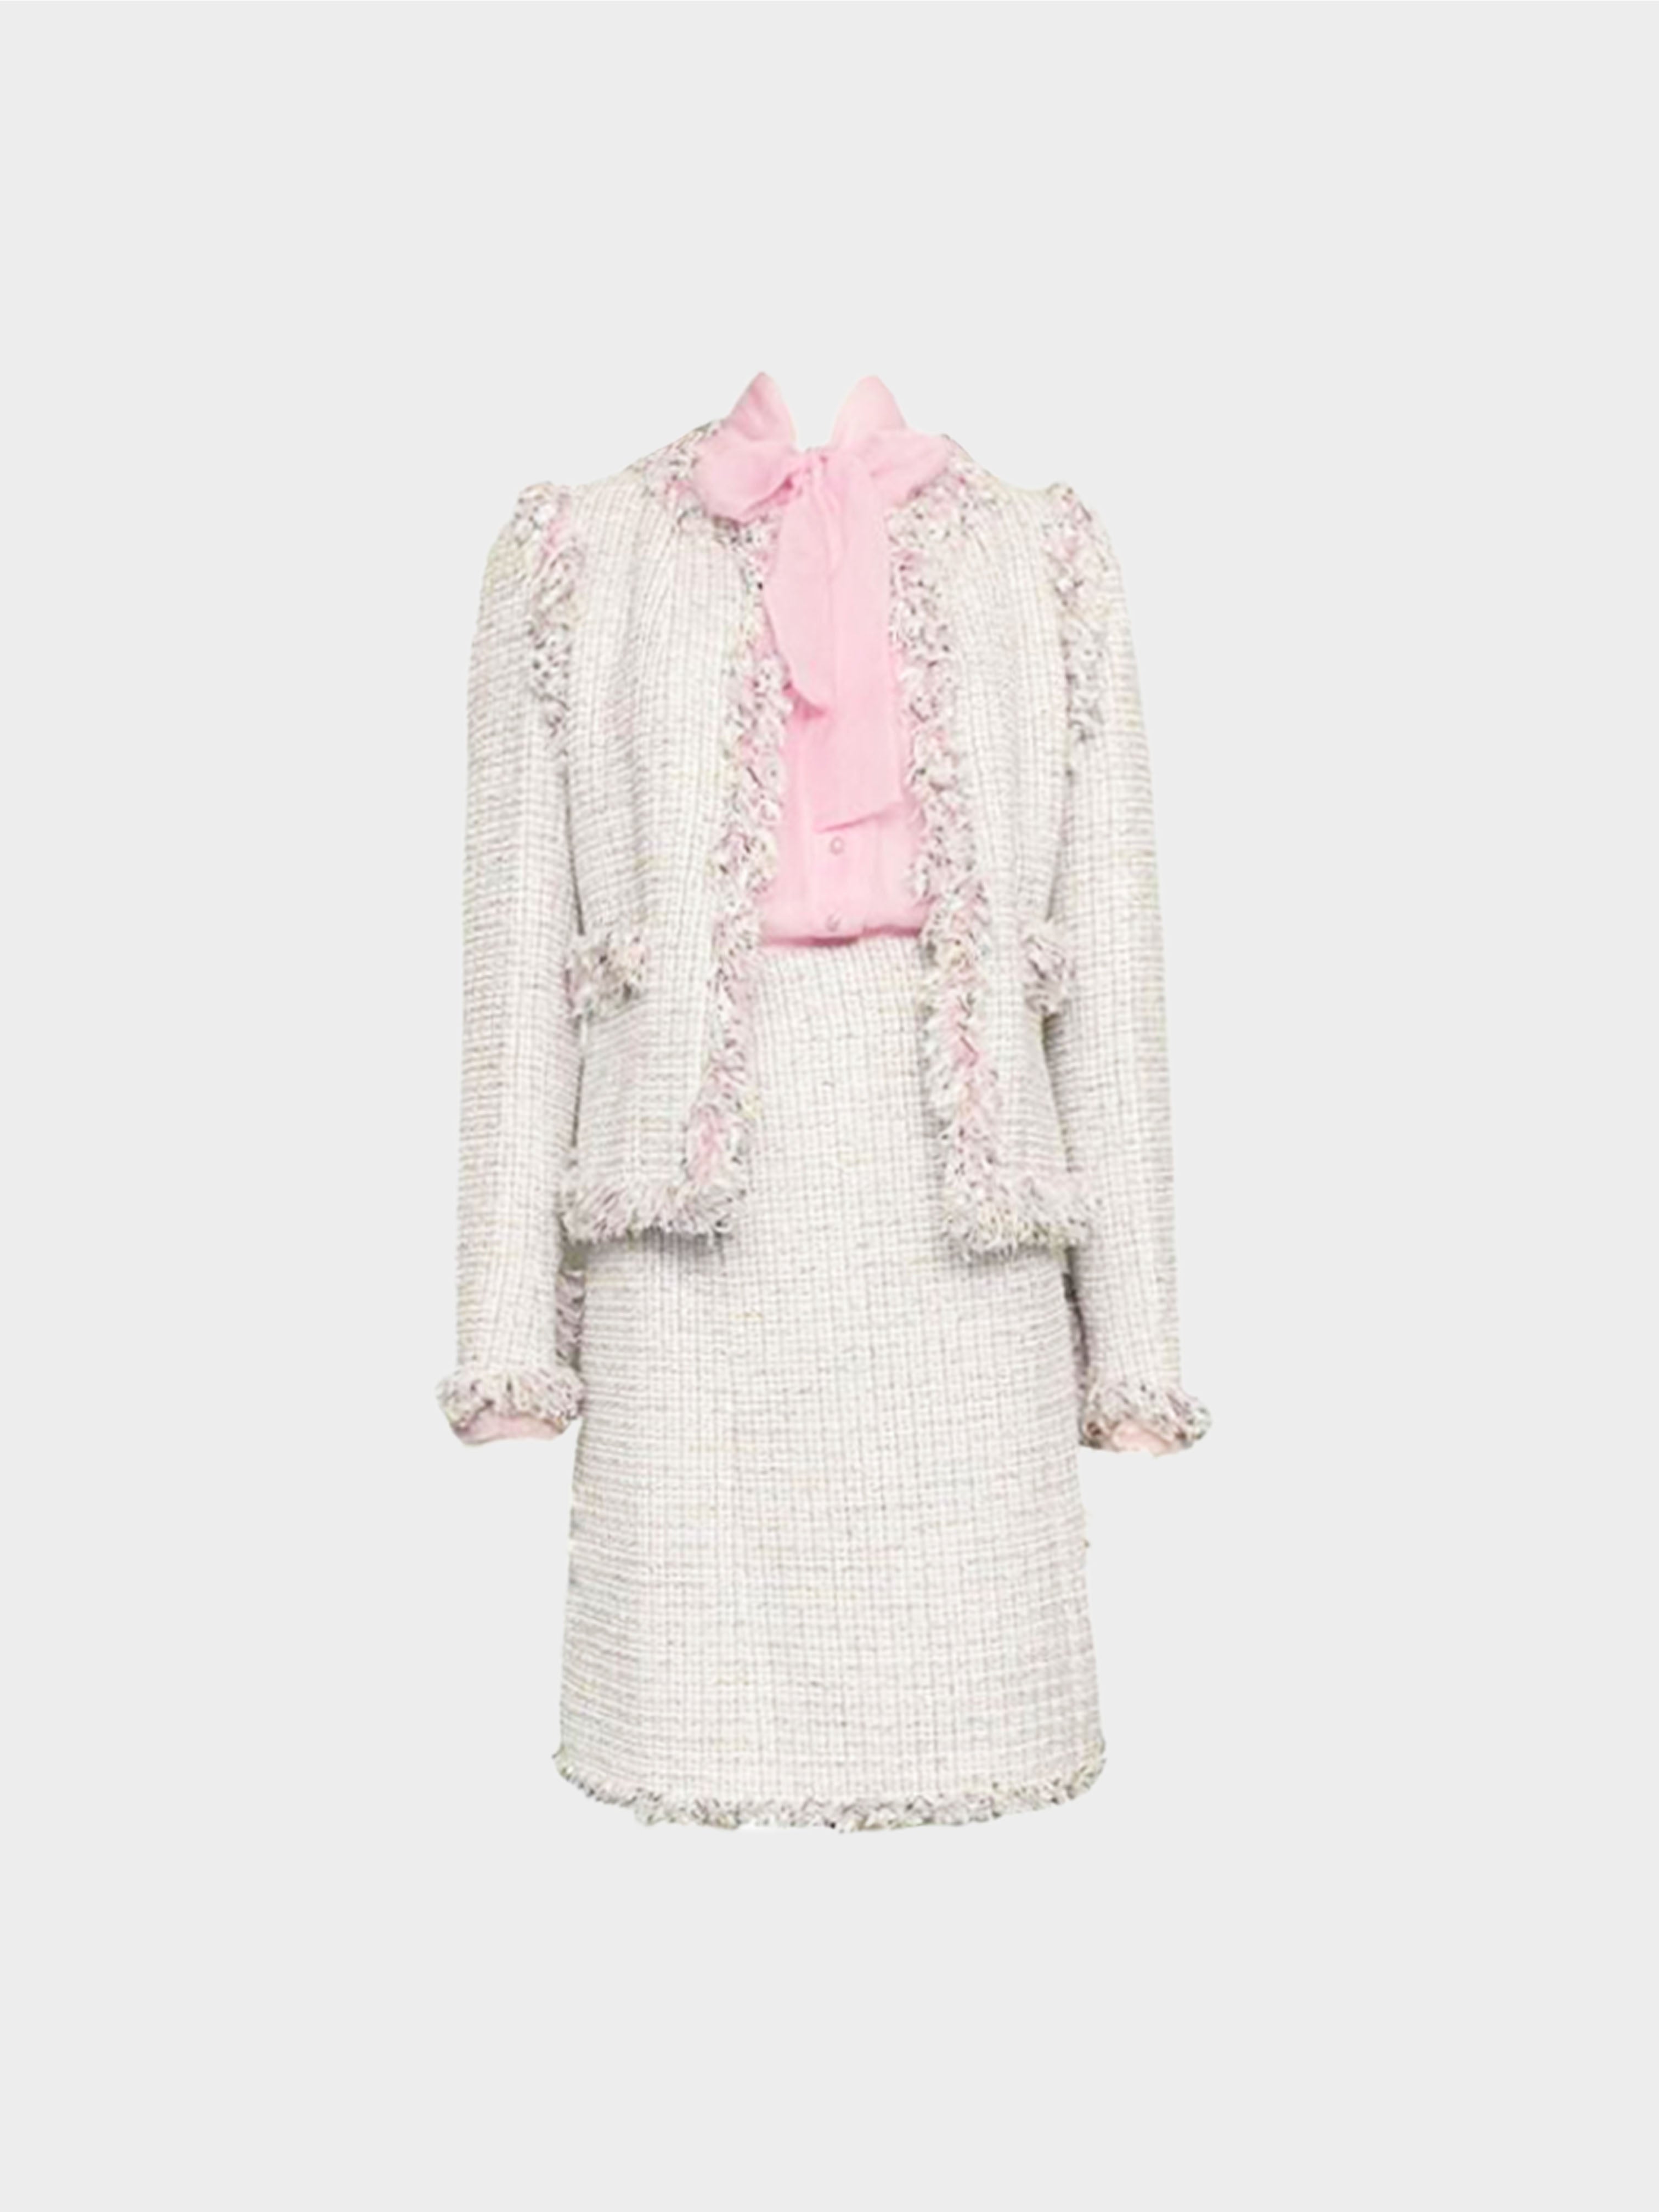 Chanel Pink and White Houndstooth Jacket and One Chanel Skirt Suit,  1990-2000s